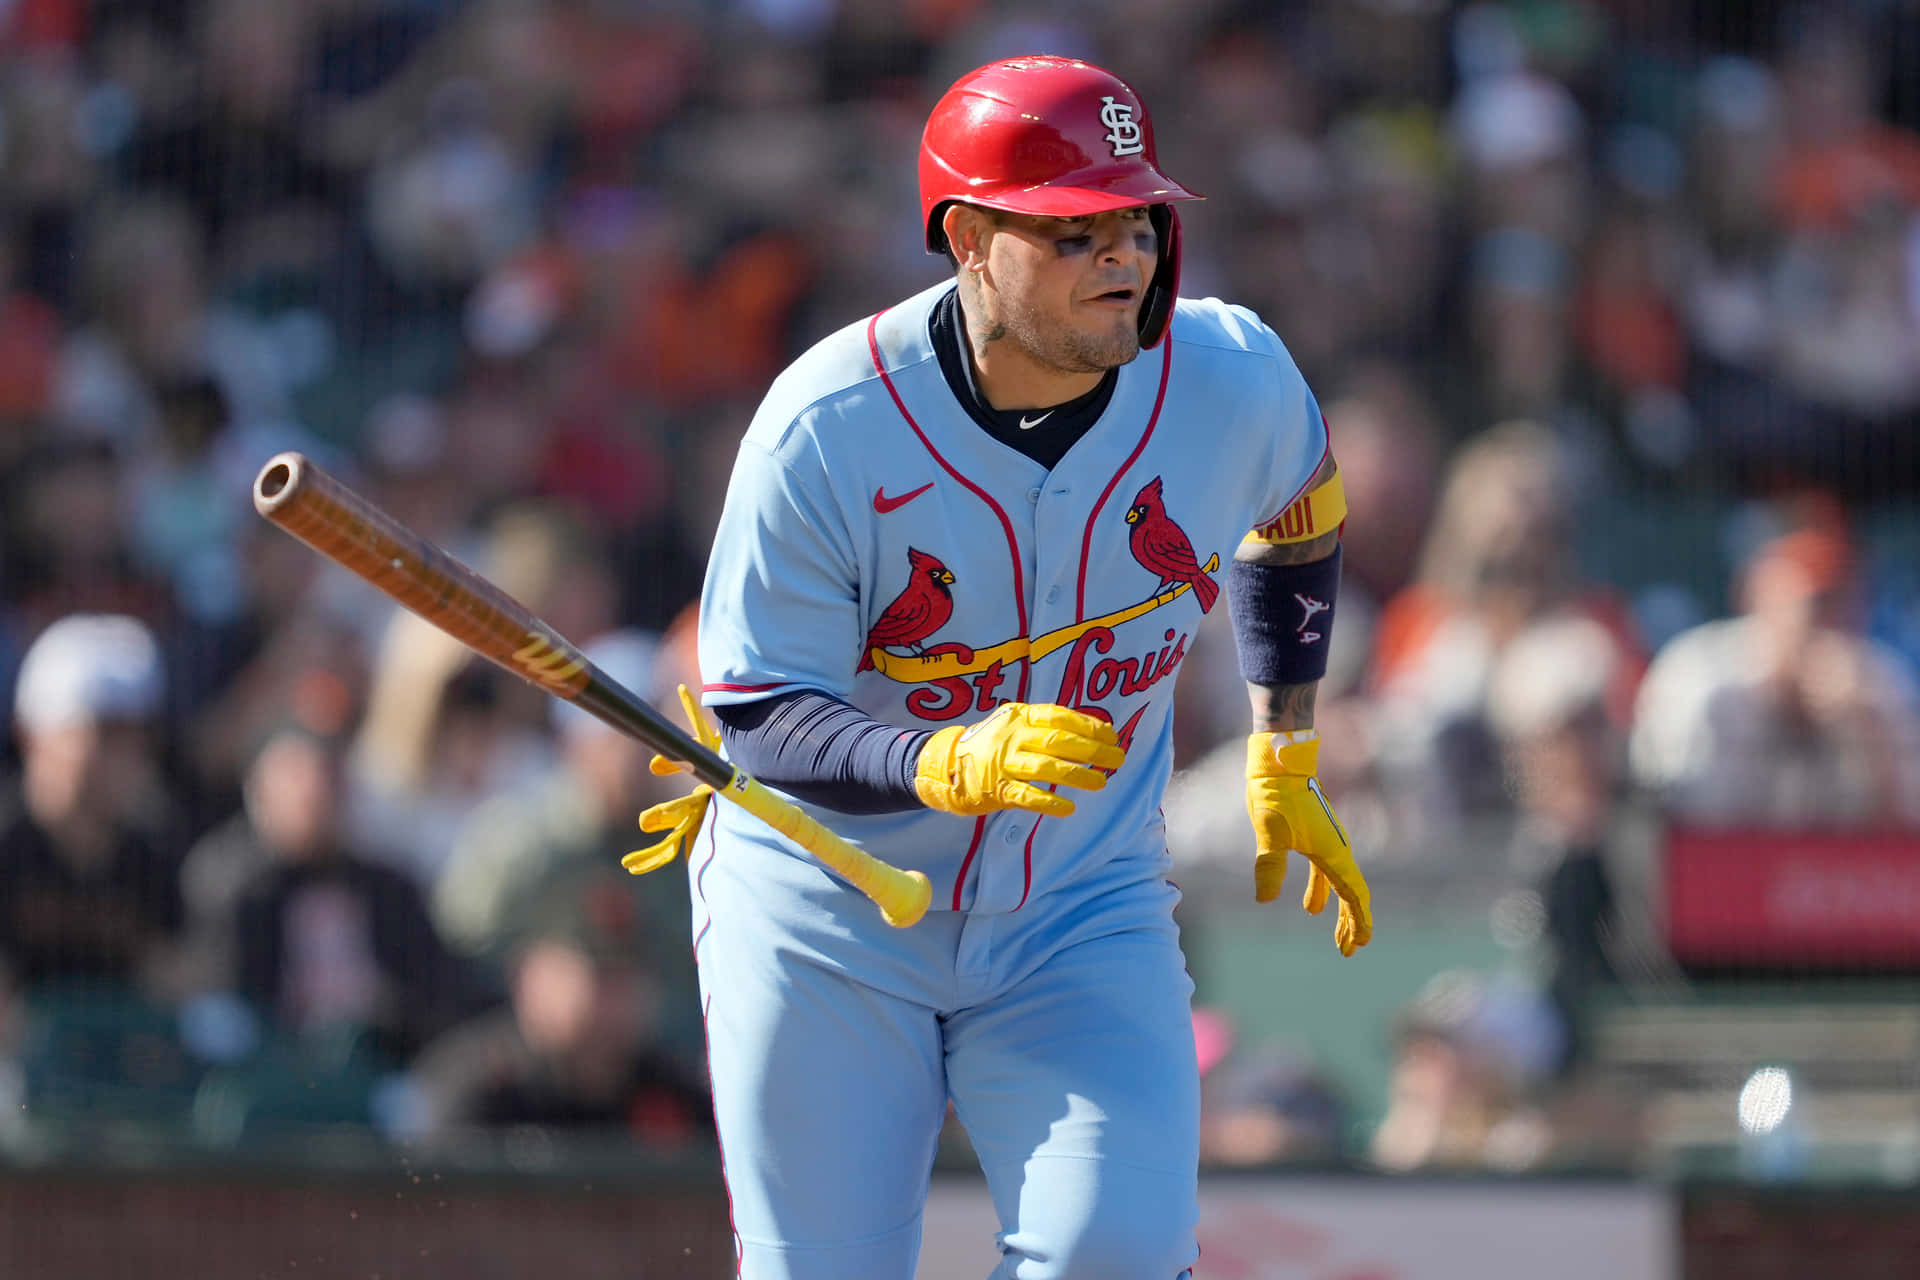 Download Yadier Molina, 9x All-Star catcher for the St. Louis